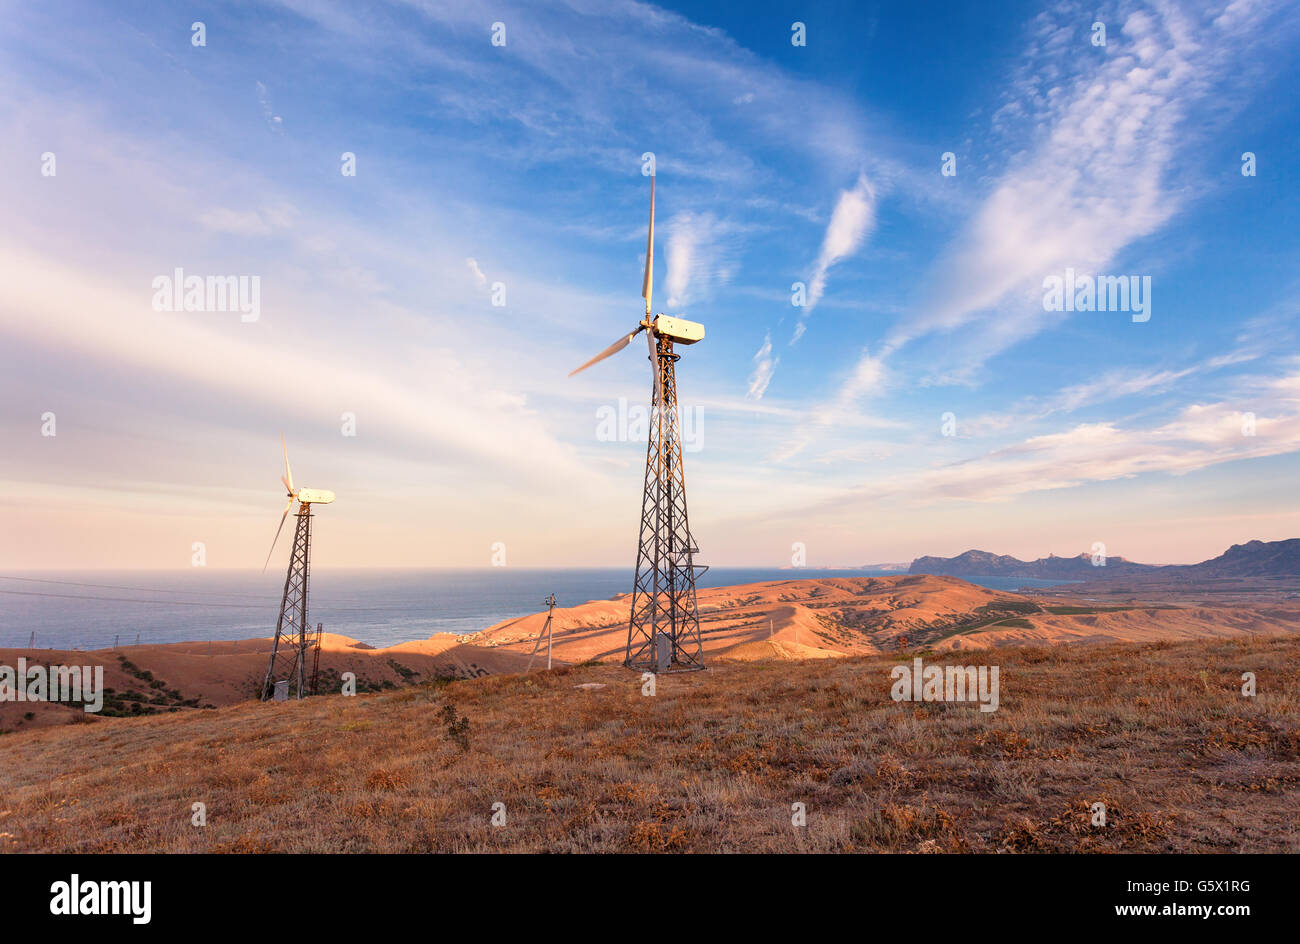 Industrial landscape with wind turbine generating electricity in mountains at sunset. Stock Photo